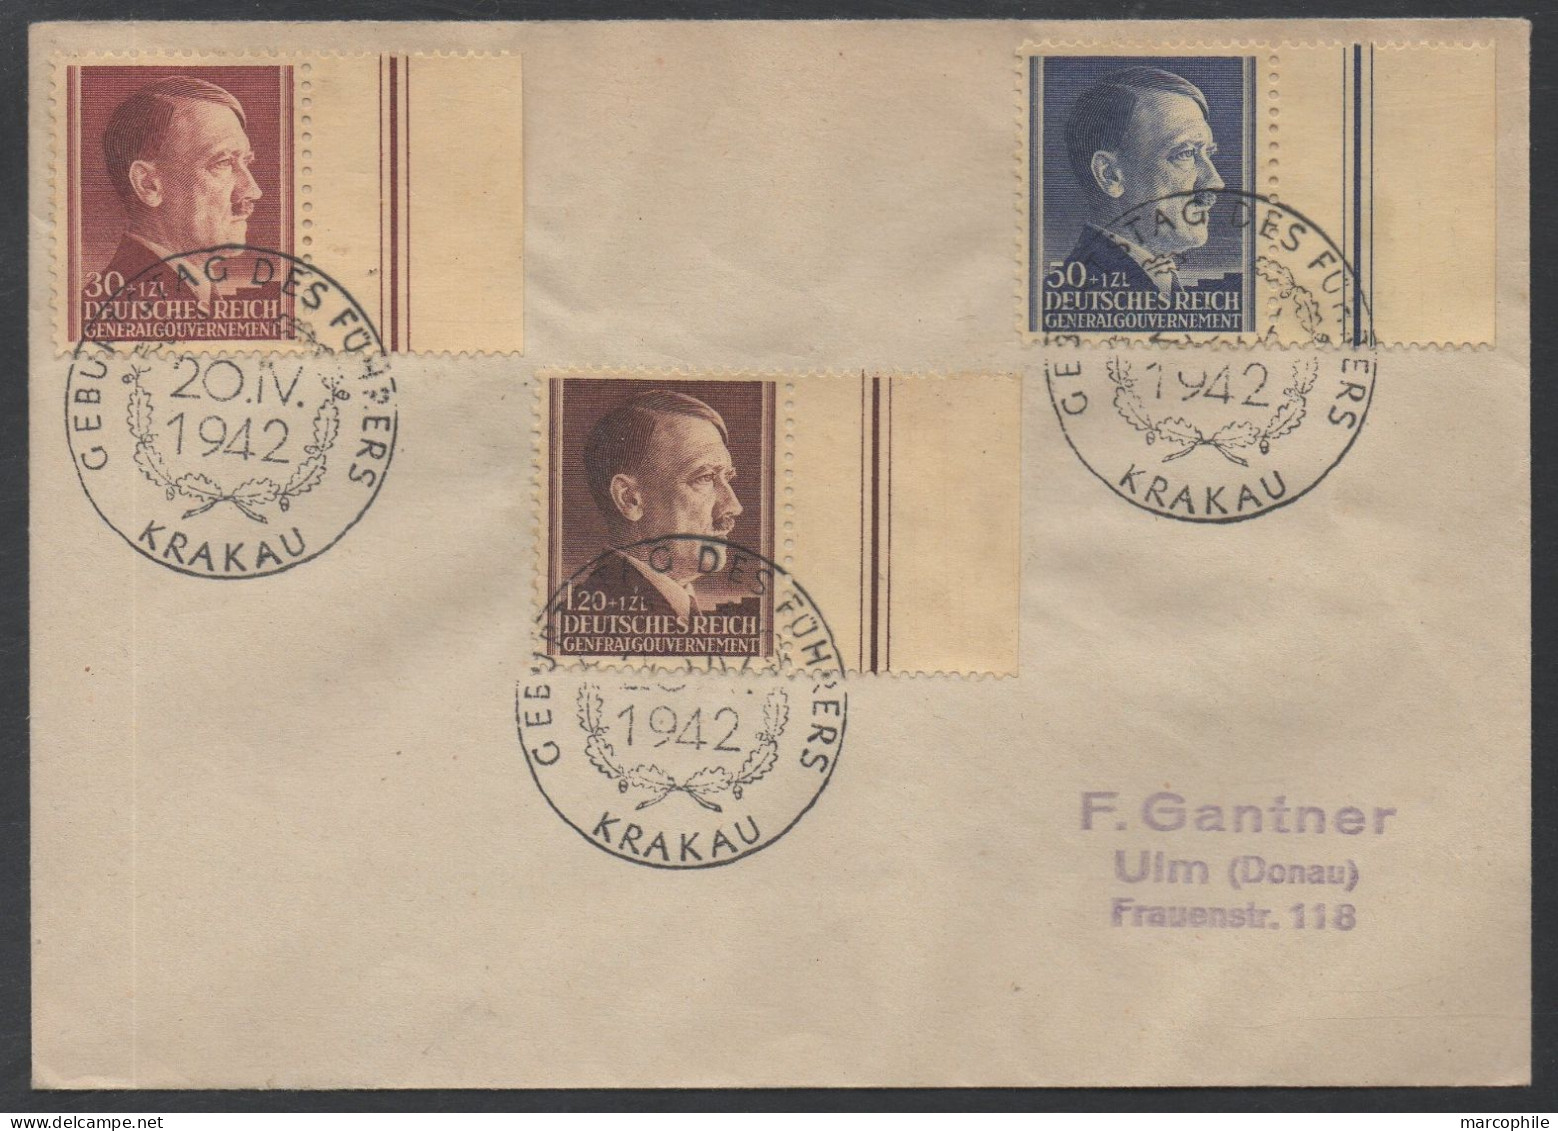 GENERAL GOUVERNEMENT - CRACOVIE - III REICH / 20-4-42 - 53e ANNIVERSAIRE HITLER - SERIE COMPLETE FDC / Mi # 89/91 - General Government